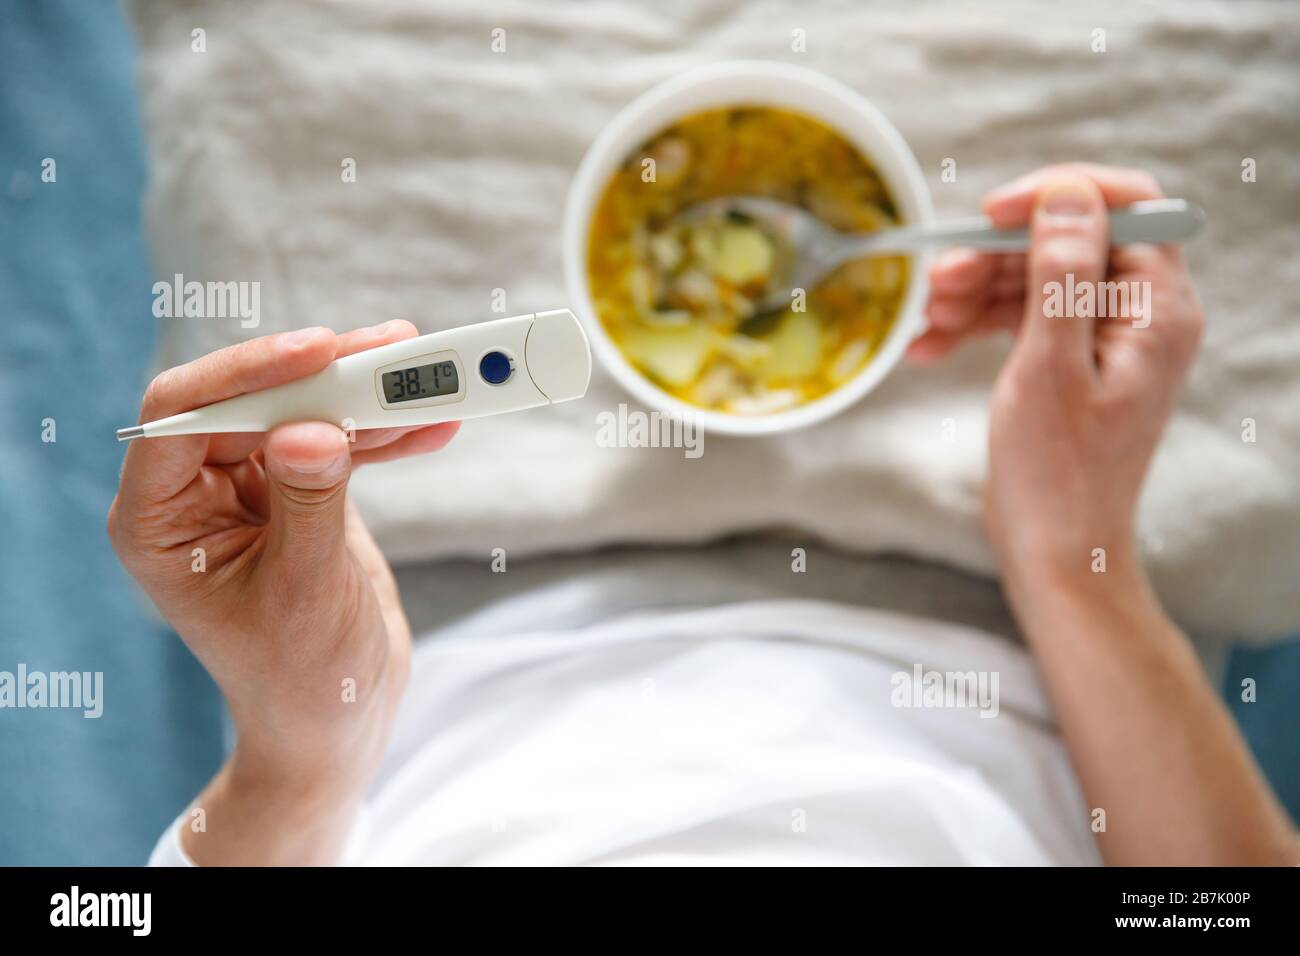 Chicken with thermometer Stock Photo by ©Kuzmafoto 15808399